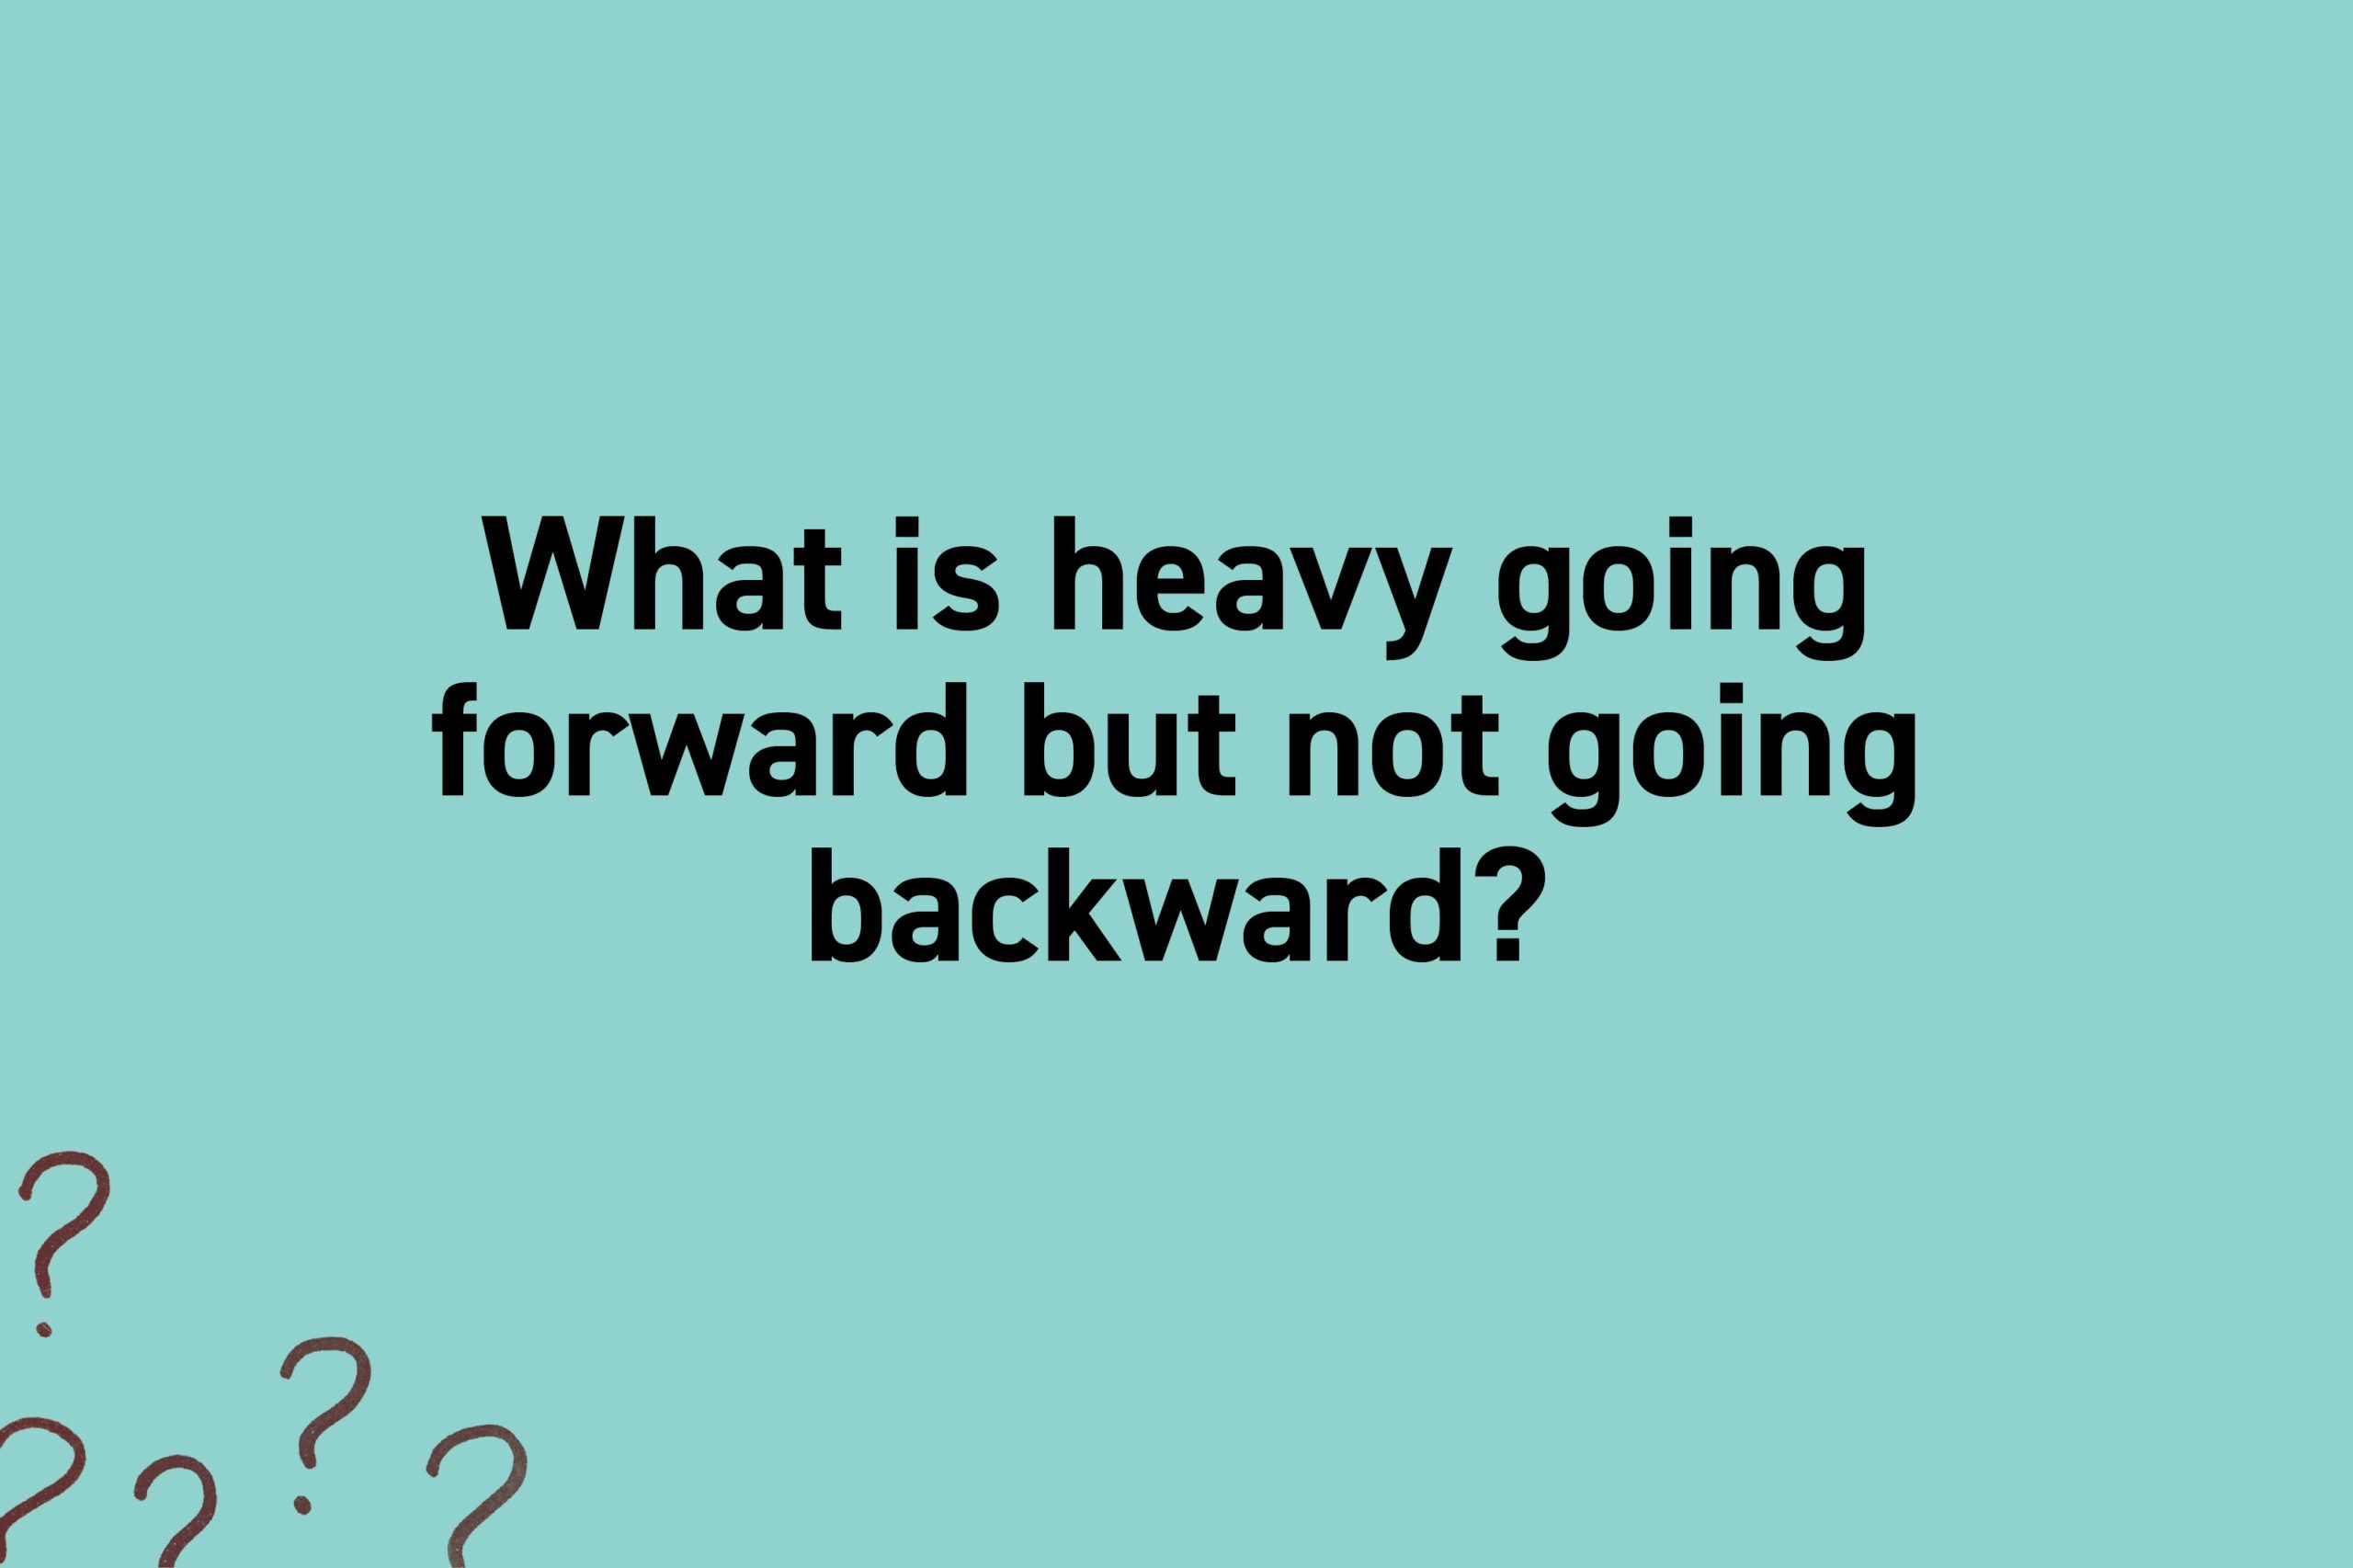 What is heavy going forward but not going backward?